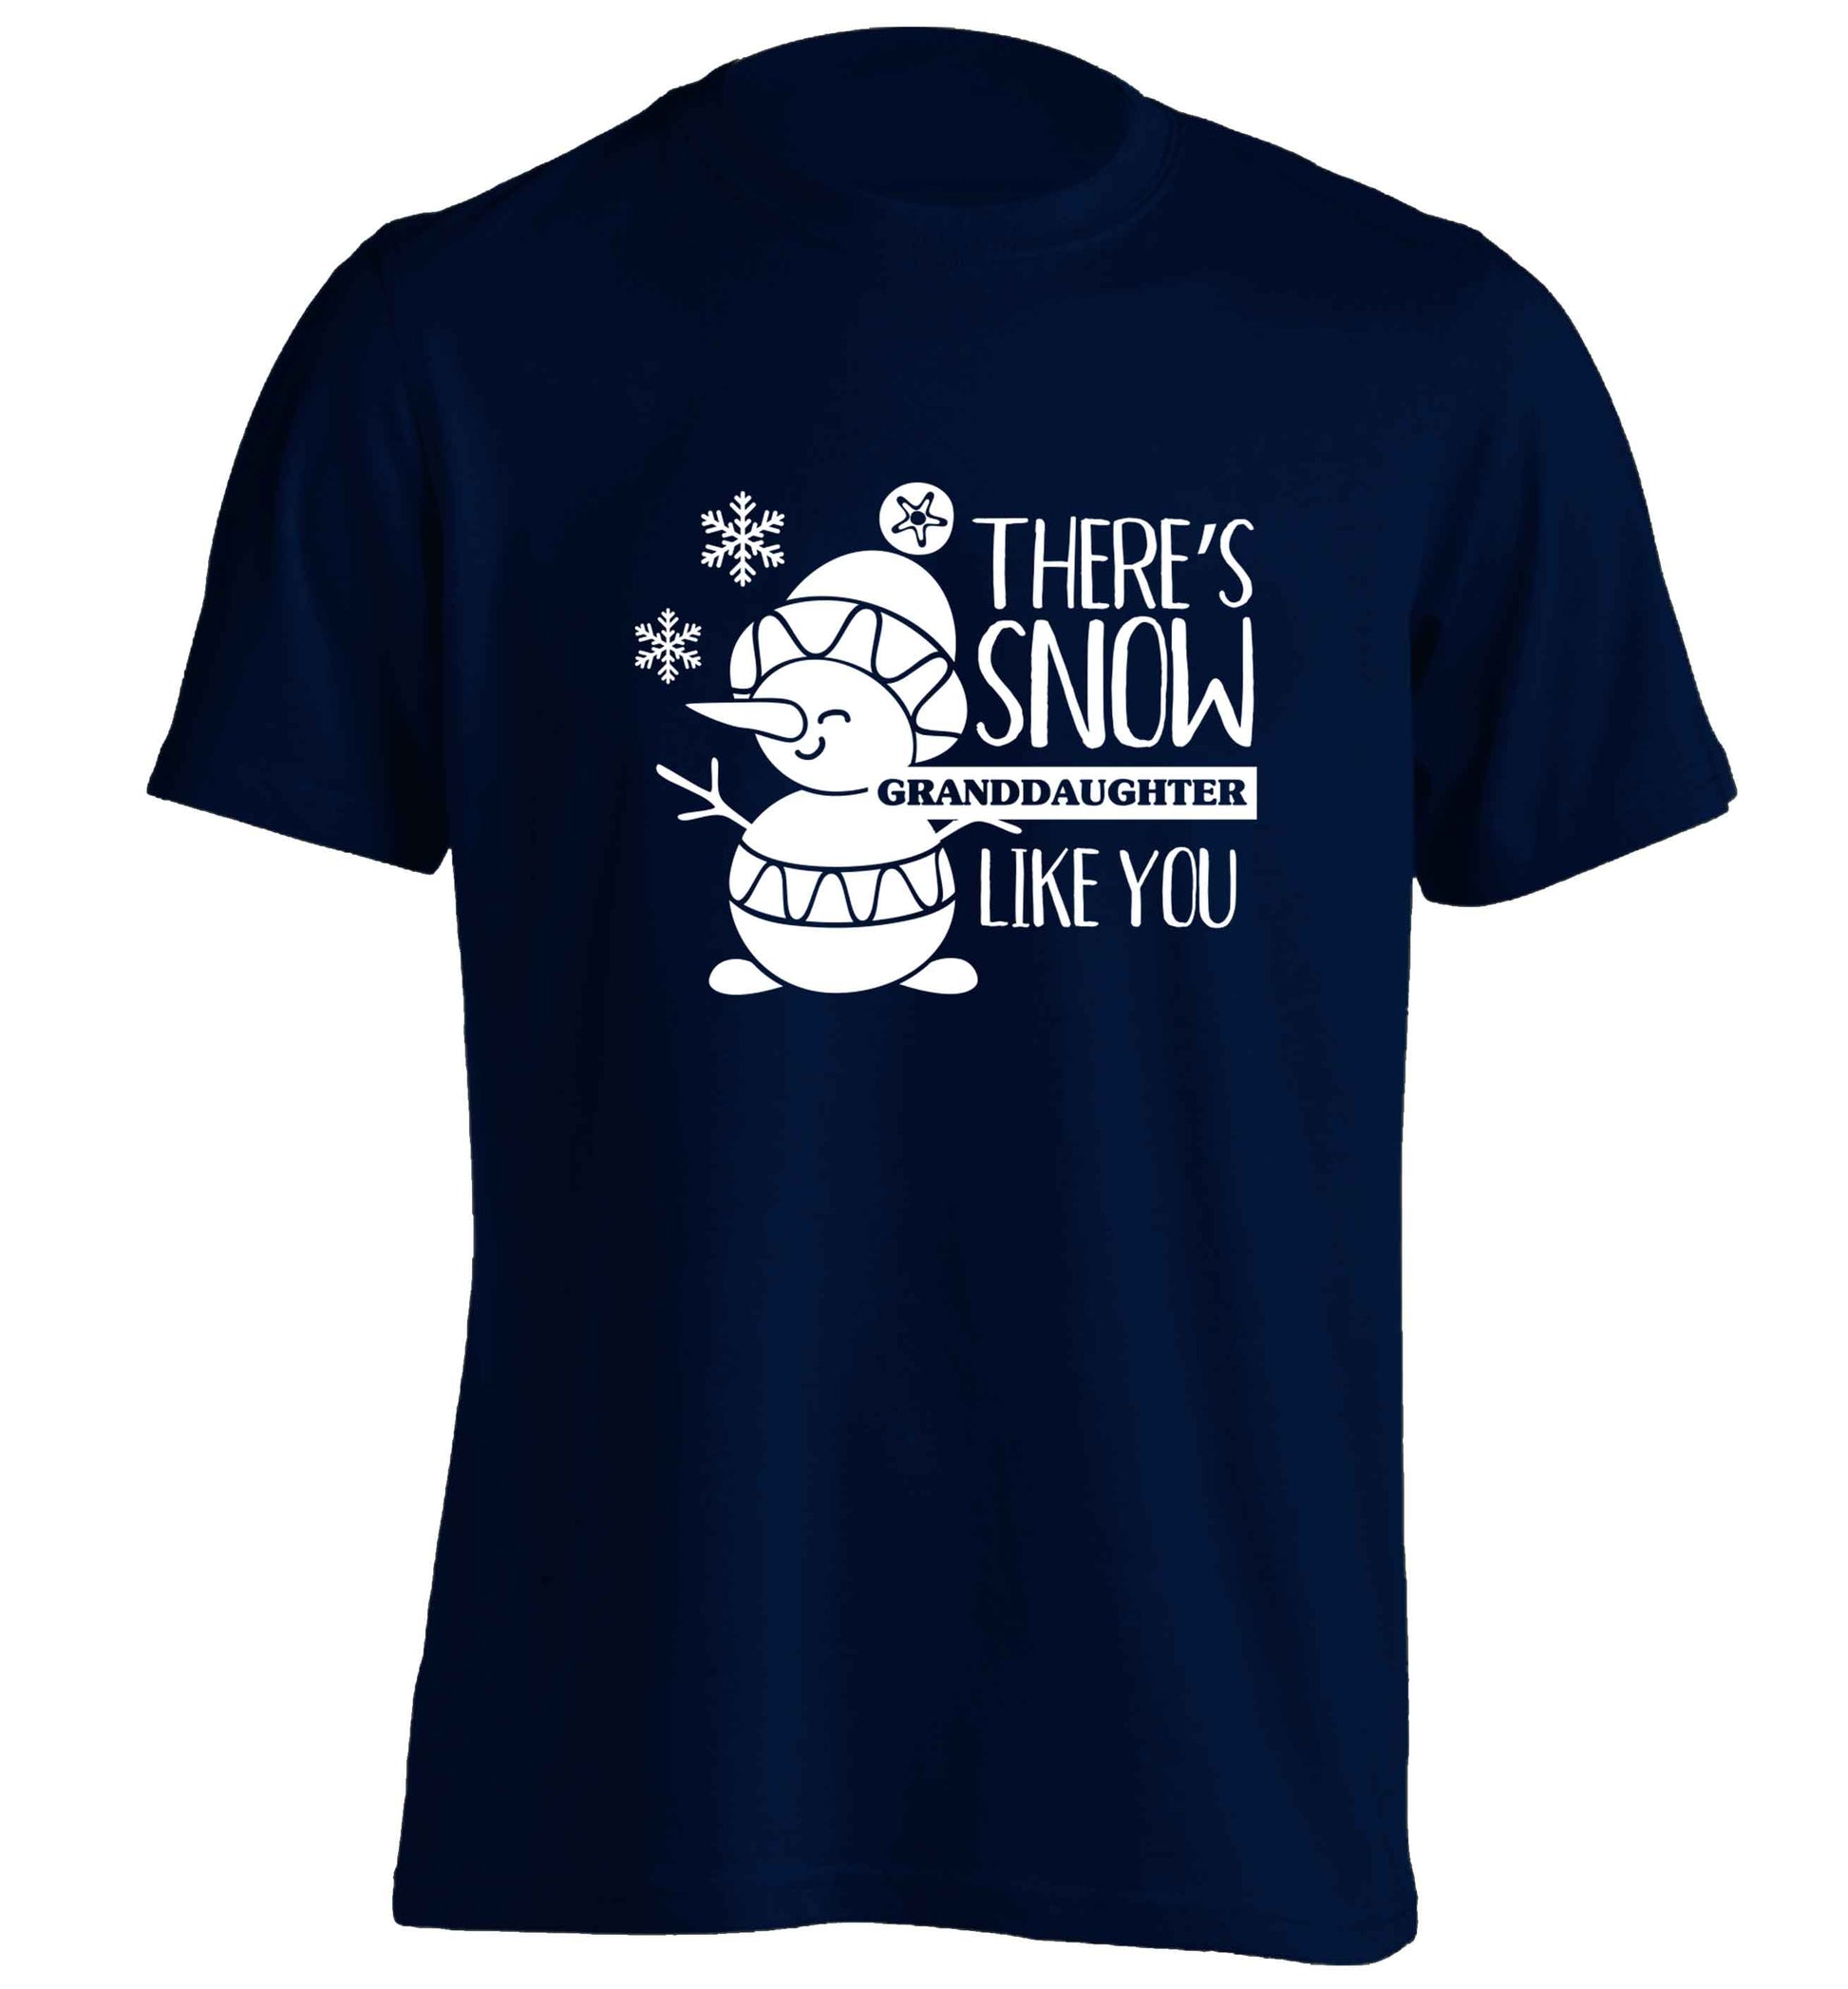 There's snow granddaughter like you adults unisex navy Tshirt 2XL